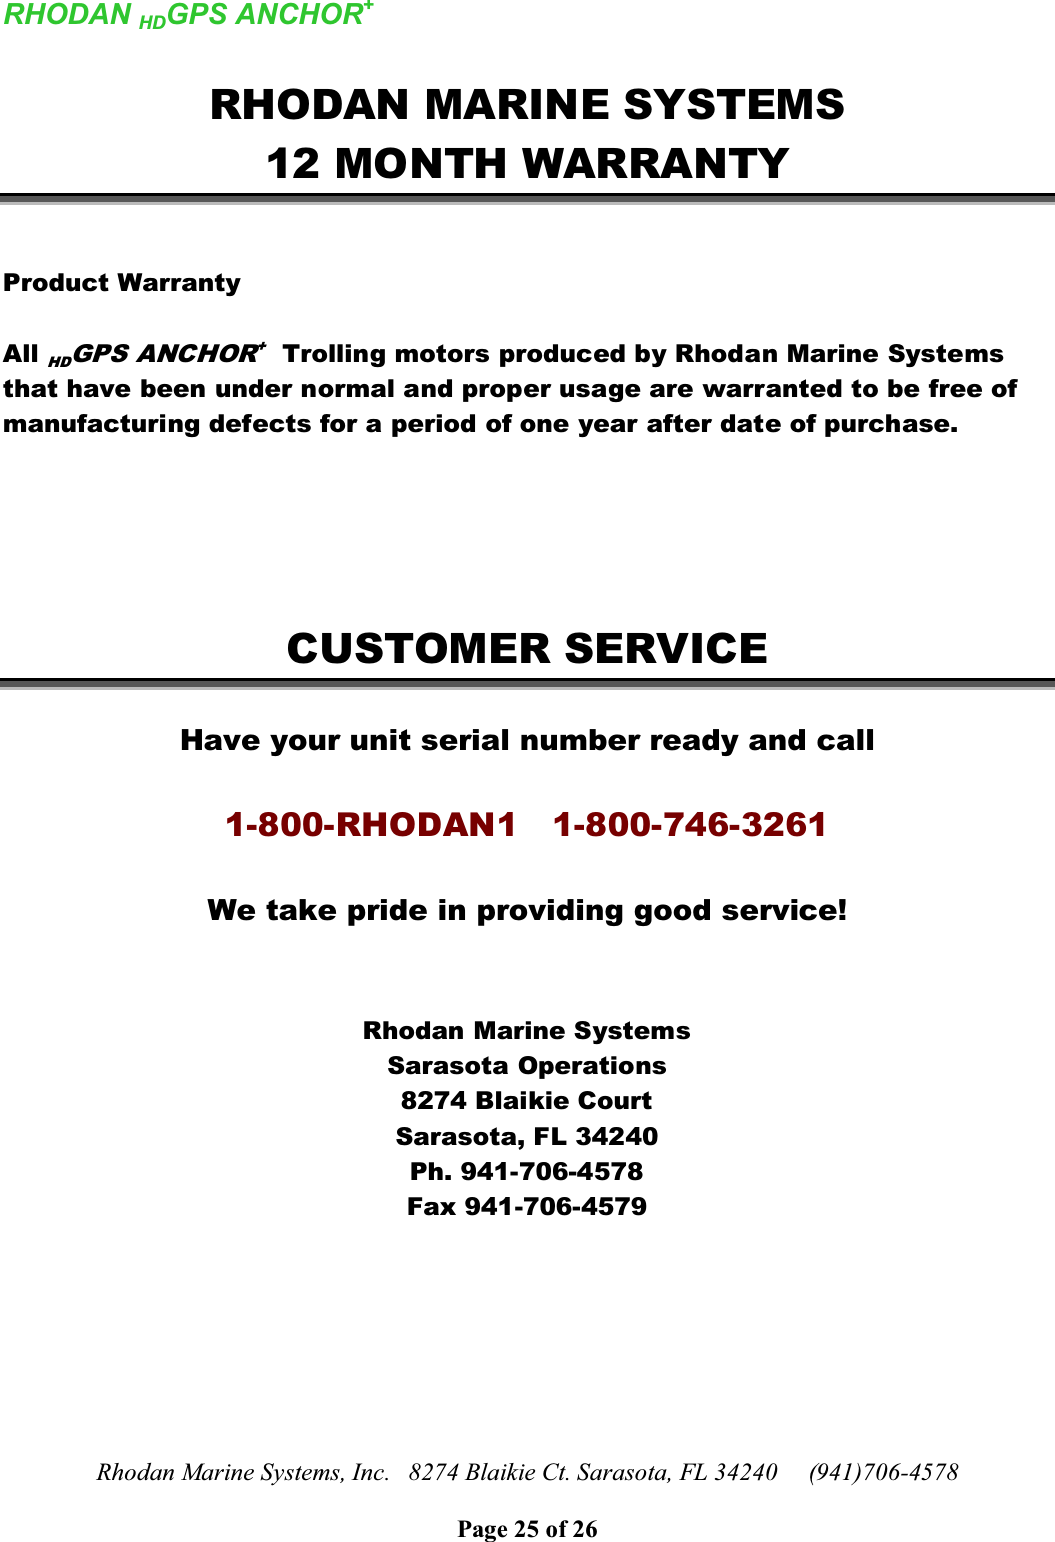 RHODAN HDGPS ANCHOR+Rhodan Marine Systems, Inc.   8274 Blaikie Ct. Sarasota, FL 34240     (941)706-4578Page 25 of 26RHODAN MARINE SYSTEMS12 MONTH WARRANTYProduct WarrantyAll HDGPS ANCHOR+Trolling motors produced by Rhodan Marine Systems that have been under normal and proper usage are warranted to be free of manufacturing defects for a period of one year after date of purchase.CUSTOMER SERVICEHave your unit serial number ready and call1-800-RHODAN1   1-800-746-3261We take pride in providing good service!Rhodan Marine SystemsSarasota Operations8274 Blaikie CourtSarasota, FL 34240Ph. 941-706-4578Fax 941-706-4579